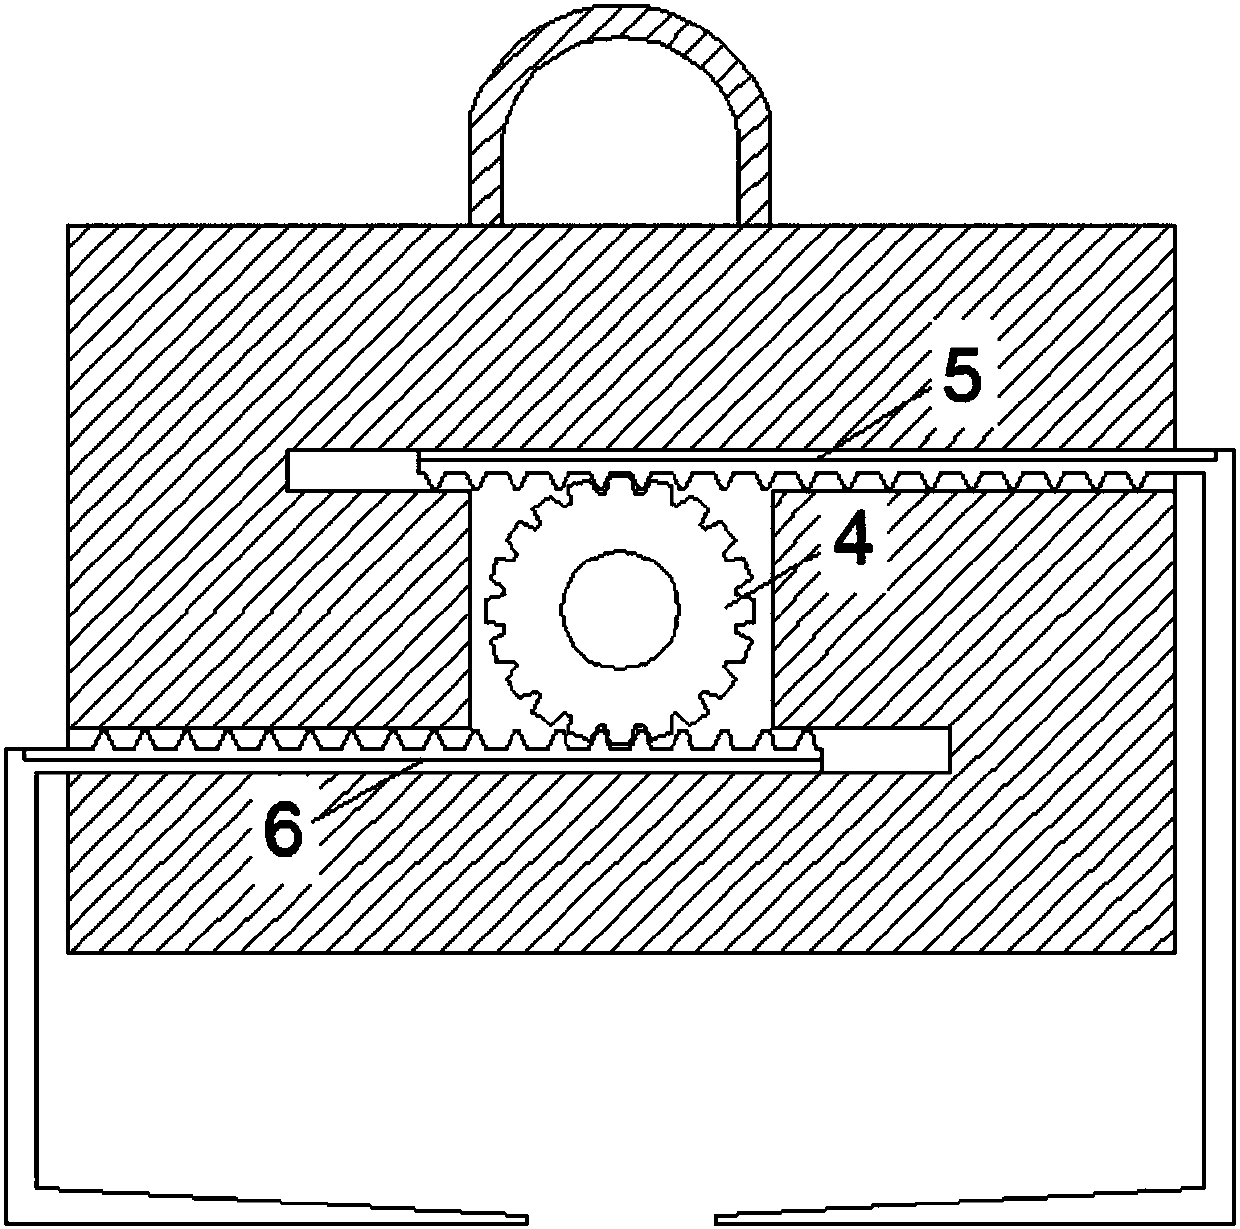 Chip plucking device